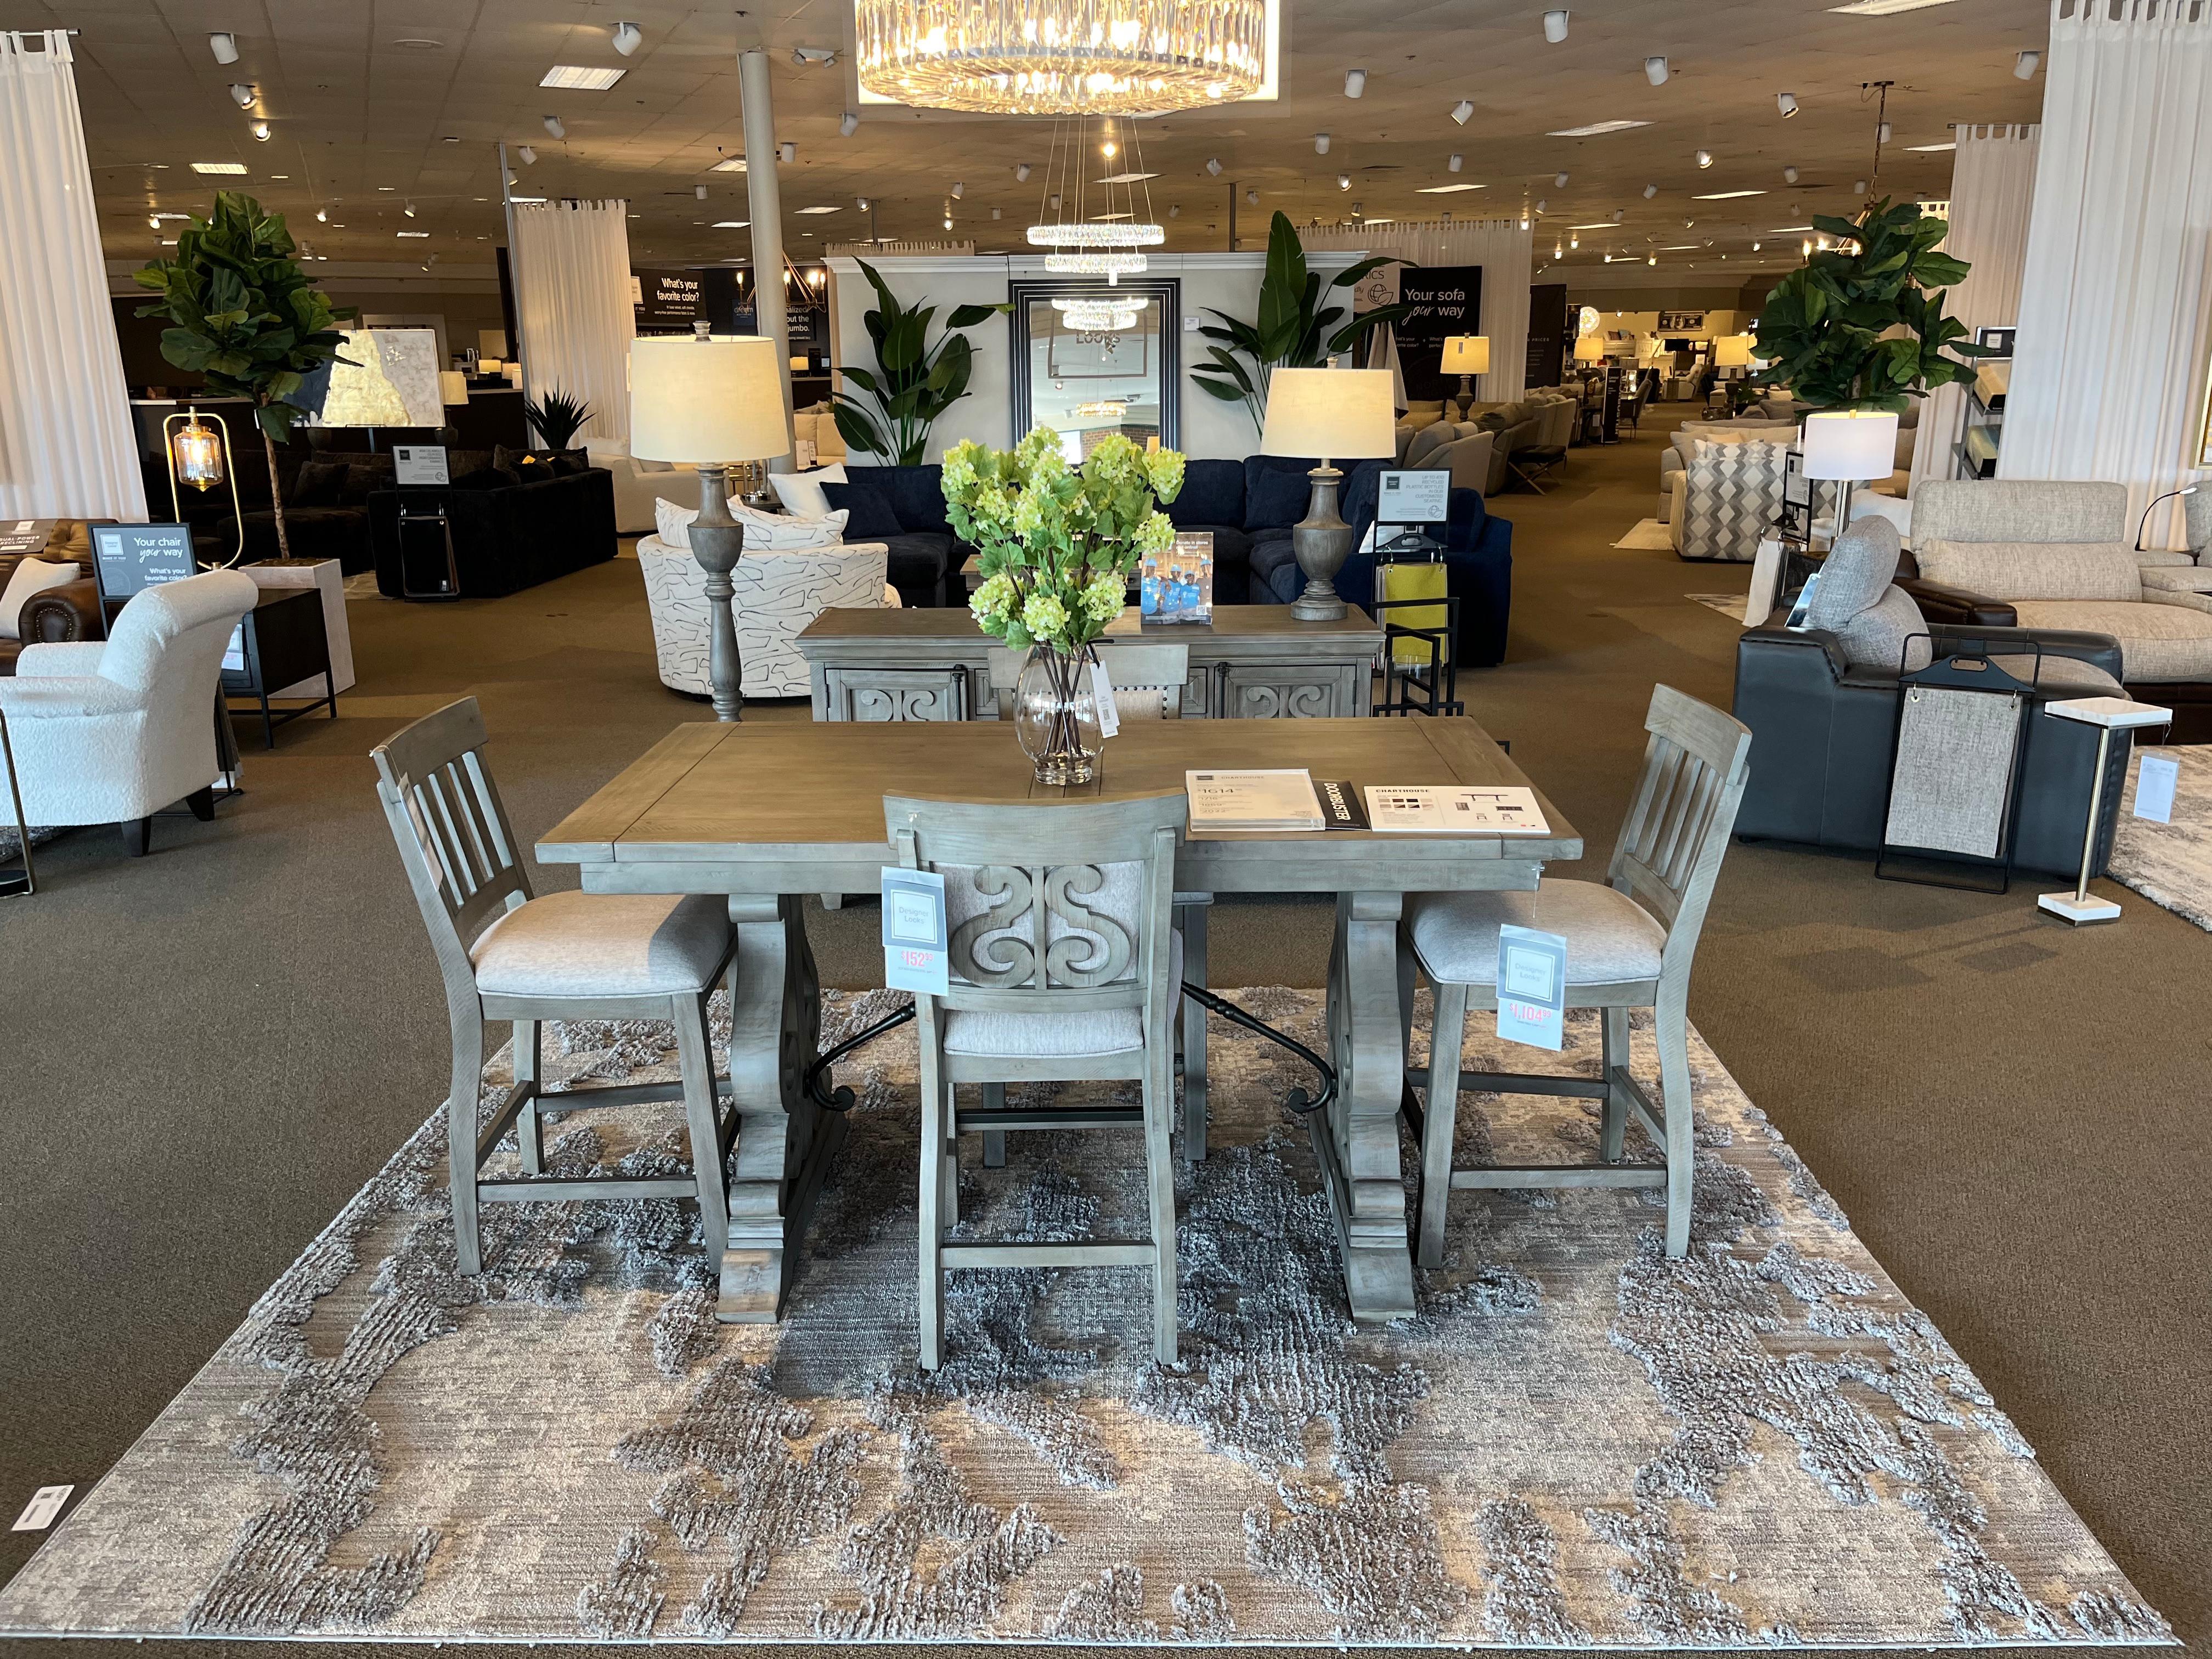 Shop our dining room collections Value City Furniture Ann Arbor (734)720-1875